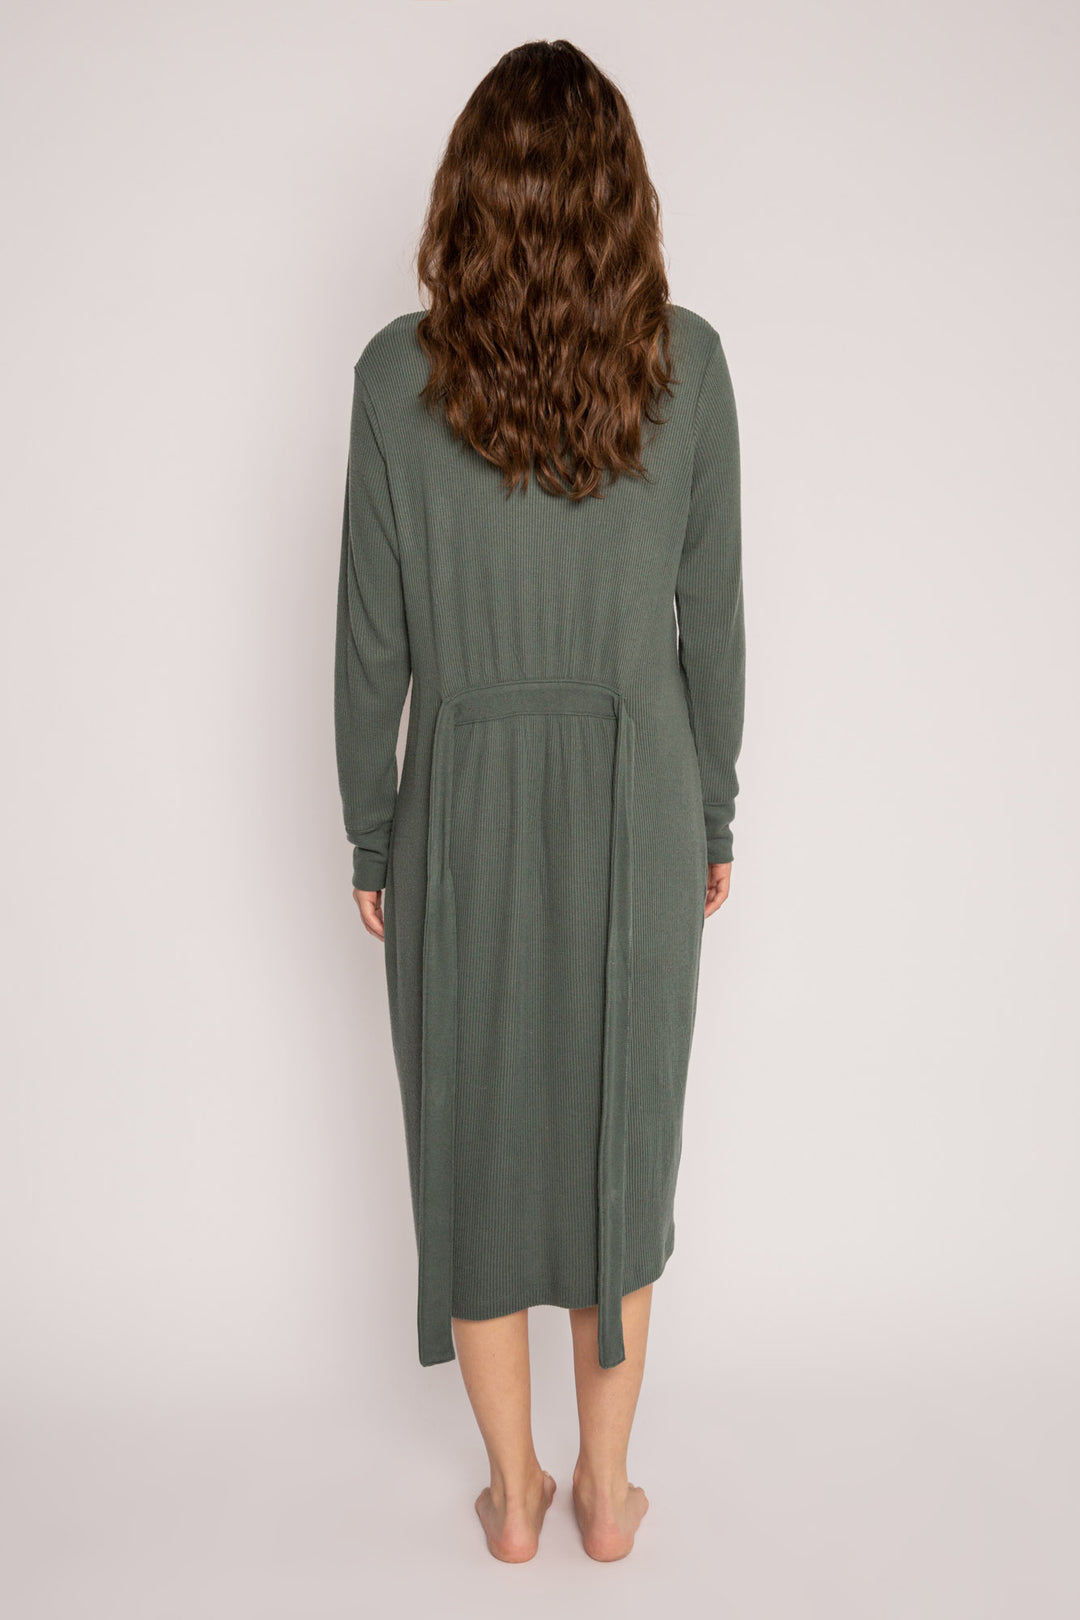 Green duster-robe with self-belt in 2x2 brushed peachy rib. Below the knee length with rib cuffs. (7199531204708)